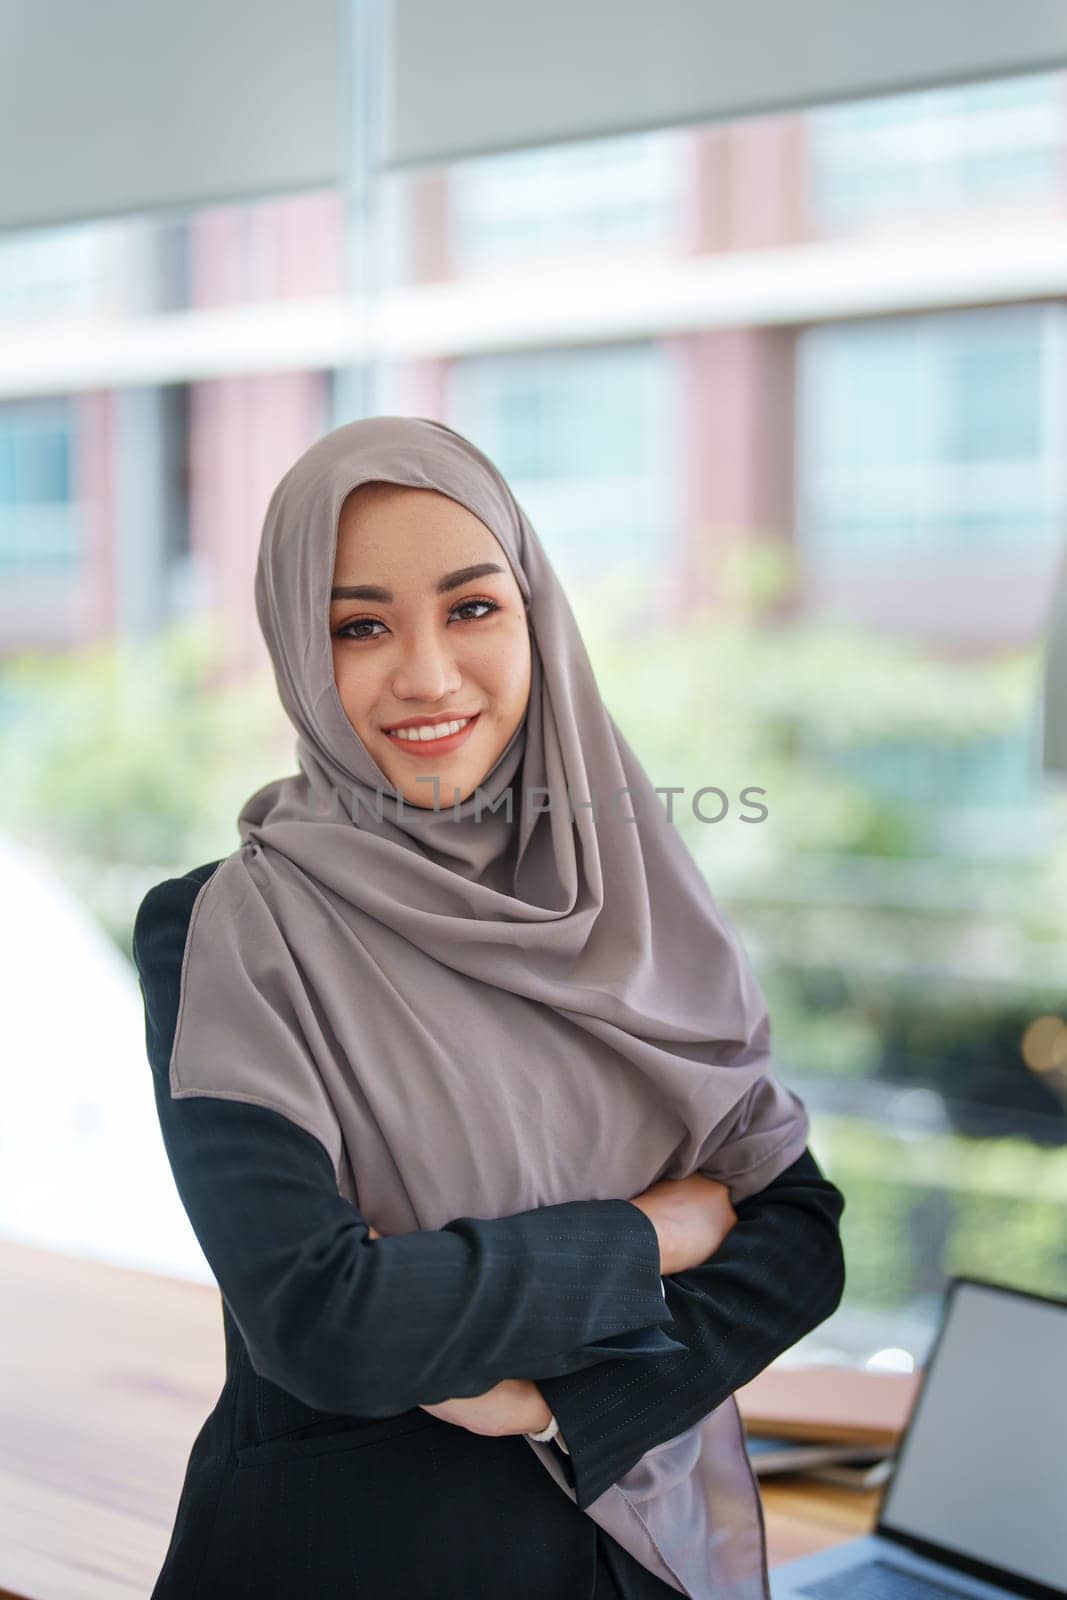 A beautiful Muslim woman showing a smiling face in the morning using computers and documents working at the office.